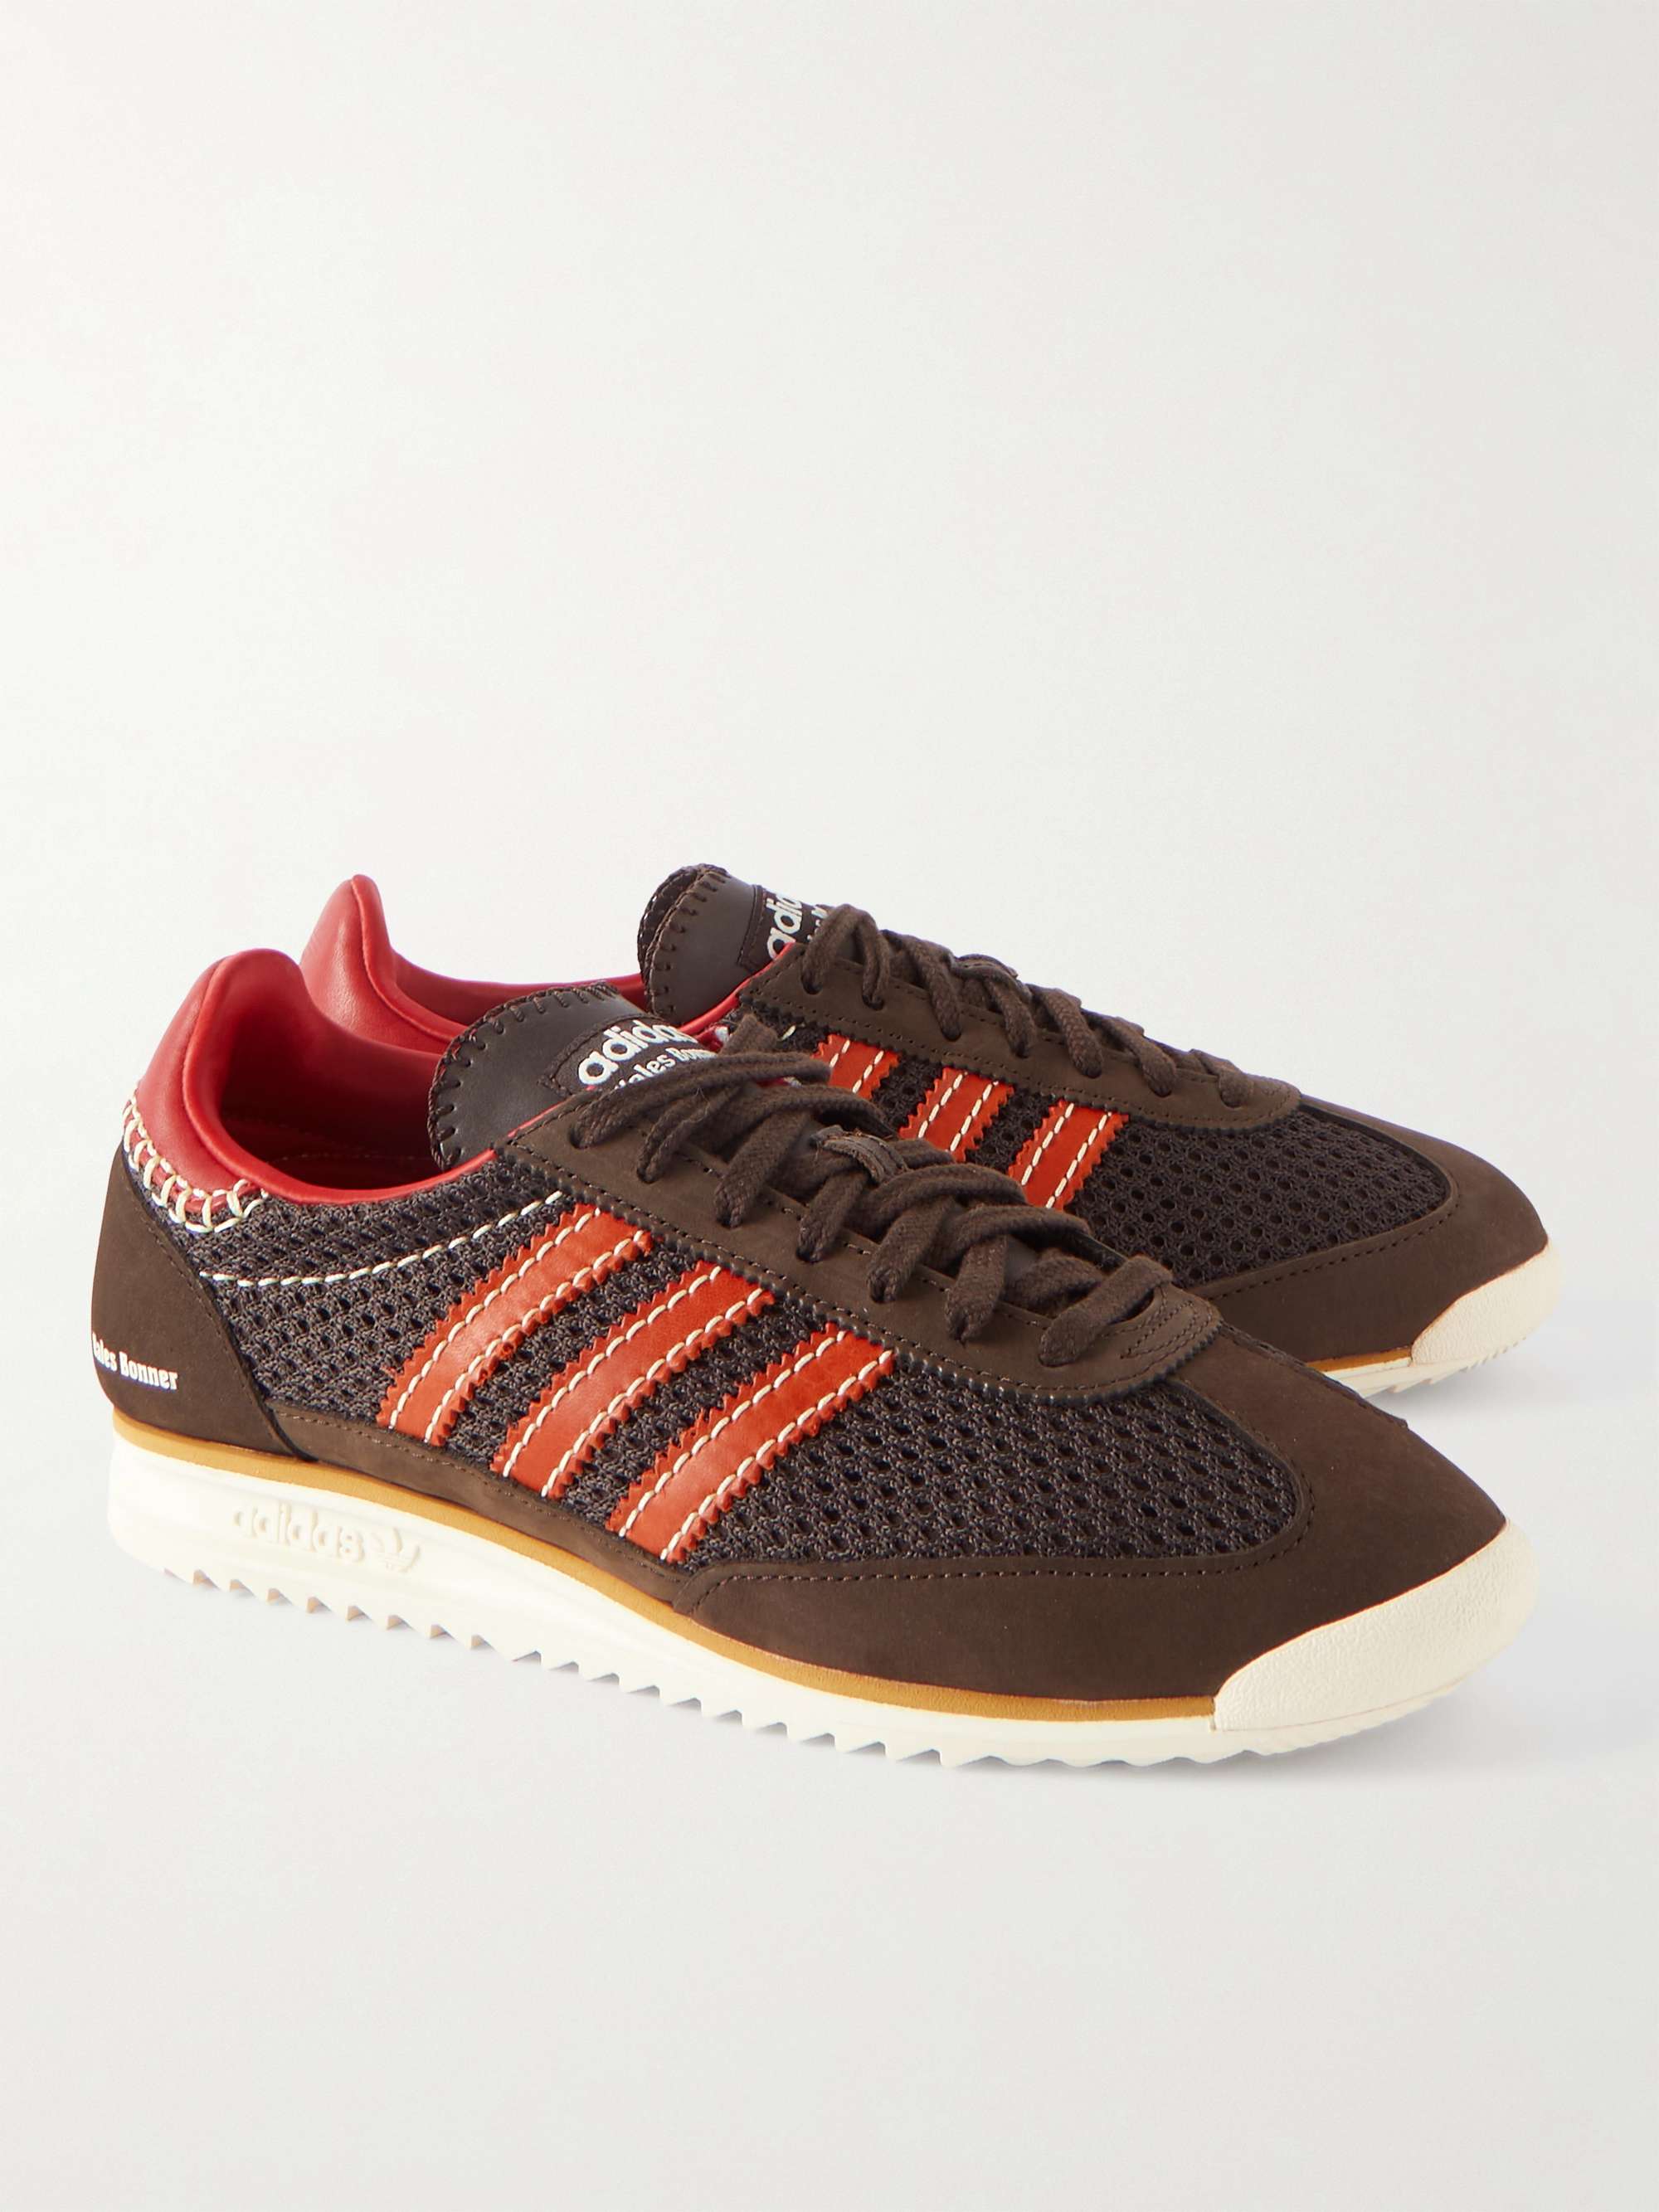 ADIDAS CONSORTIUM + Wales Bonner SL72 Suede and Mesh Sneakers for Men | MR  PORTER